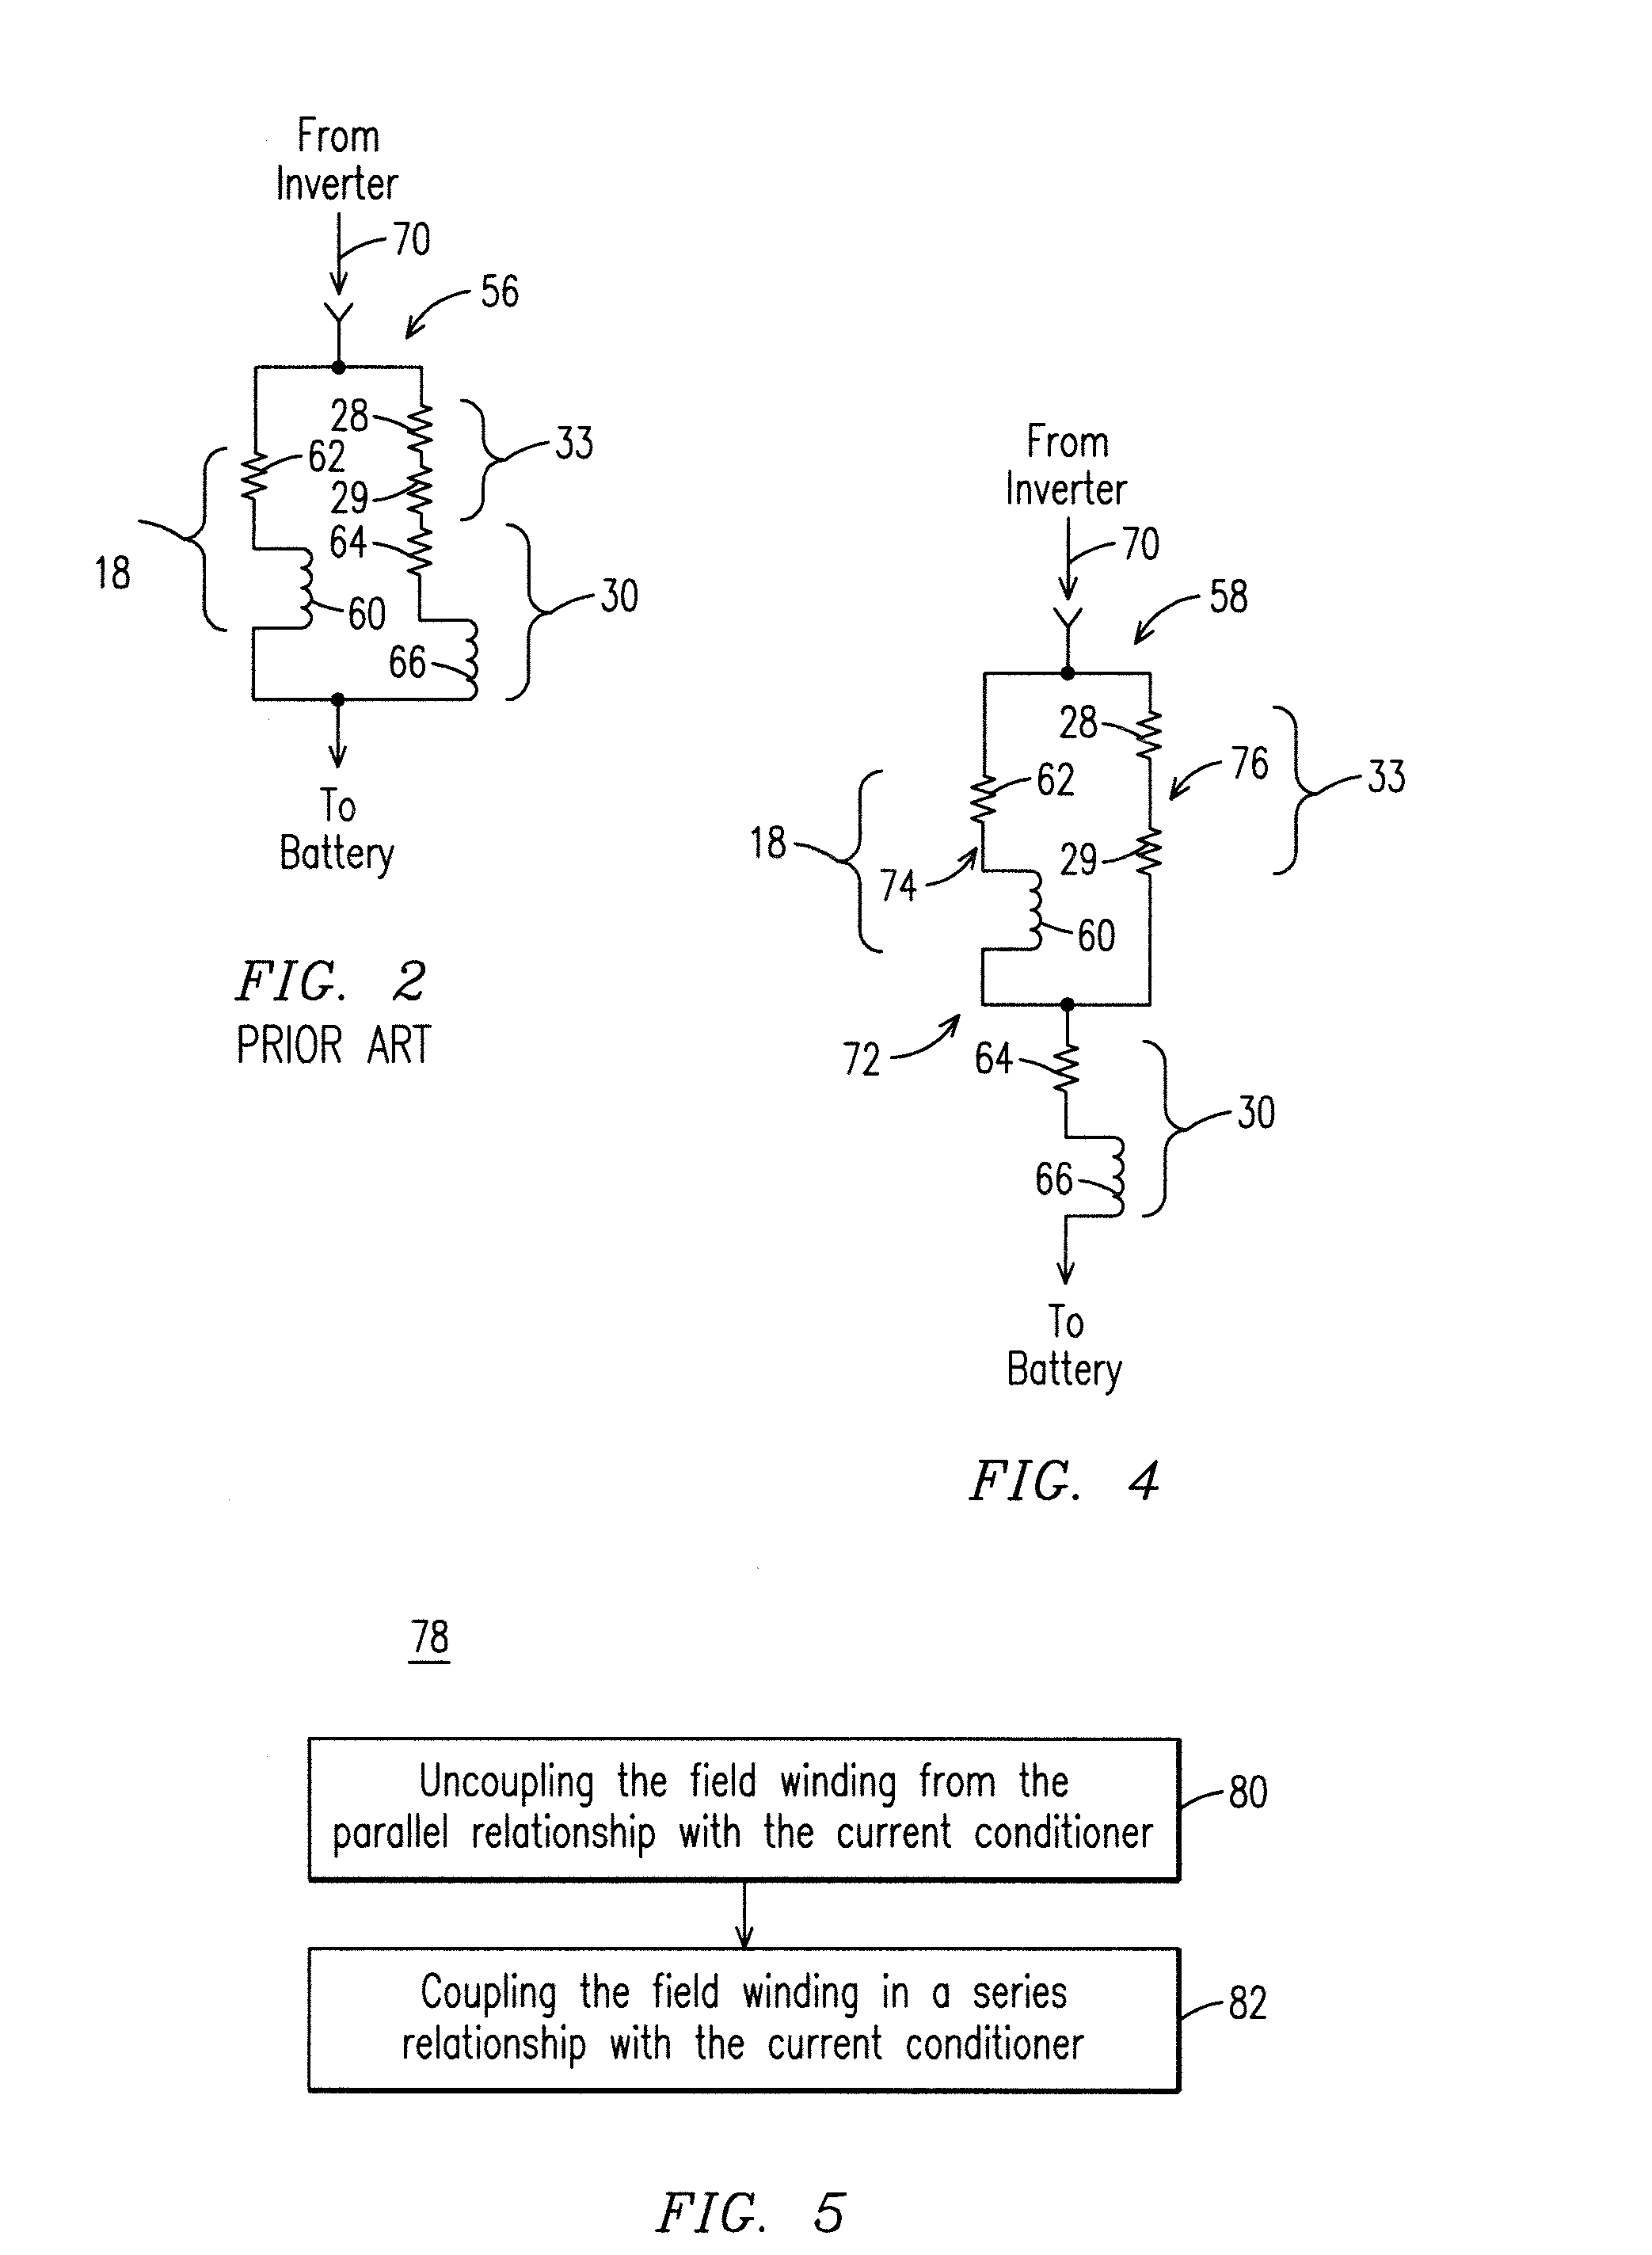 Circuit and Method for Reducing a Voltage Being Developed Across a Field Winding of a Synchronous Machine